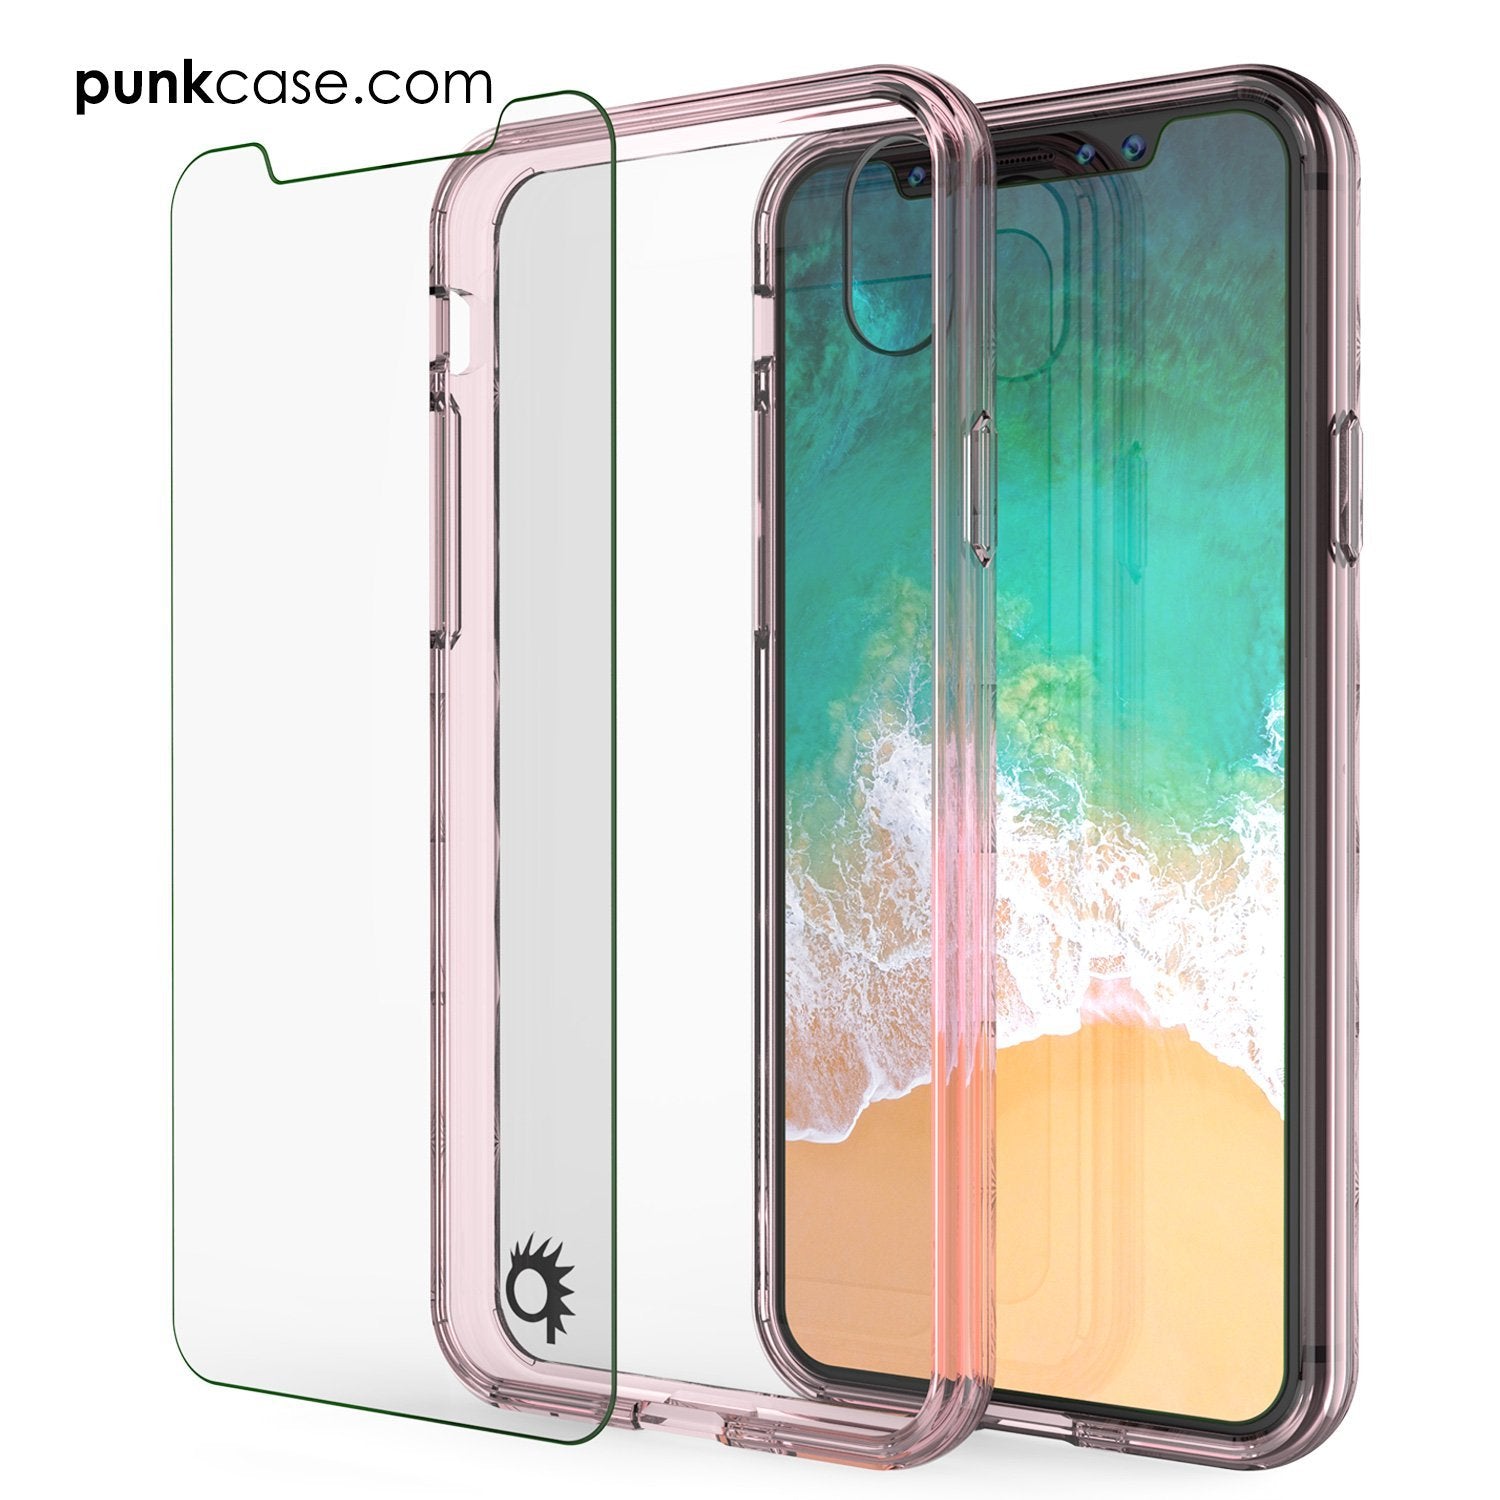 iPhone X Punkcase, LUCID 2.0 Series Slim Fit  Cover [Crystal Pink]